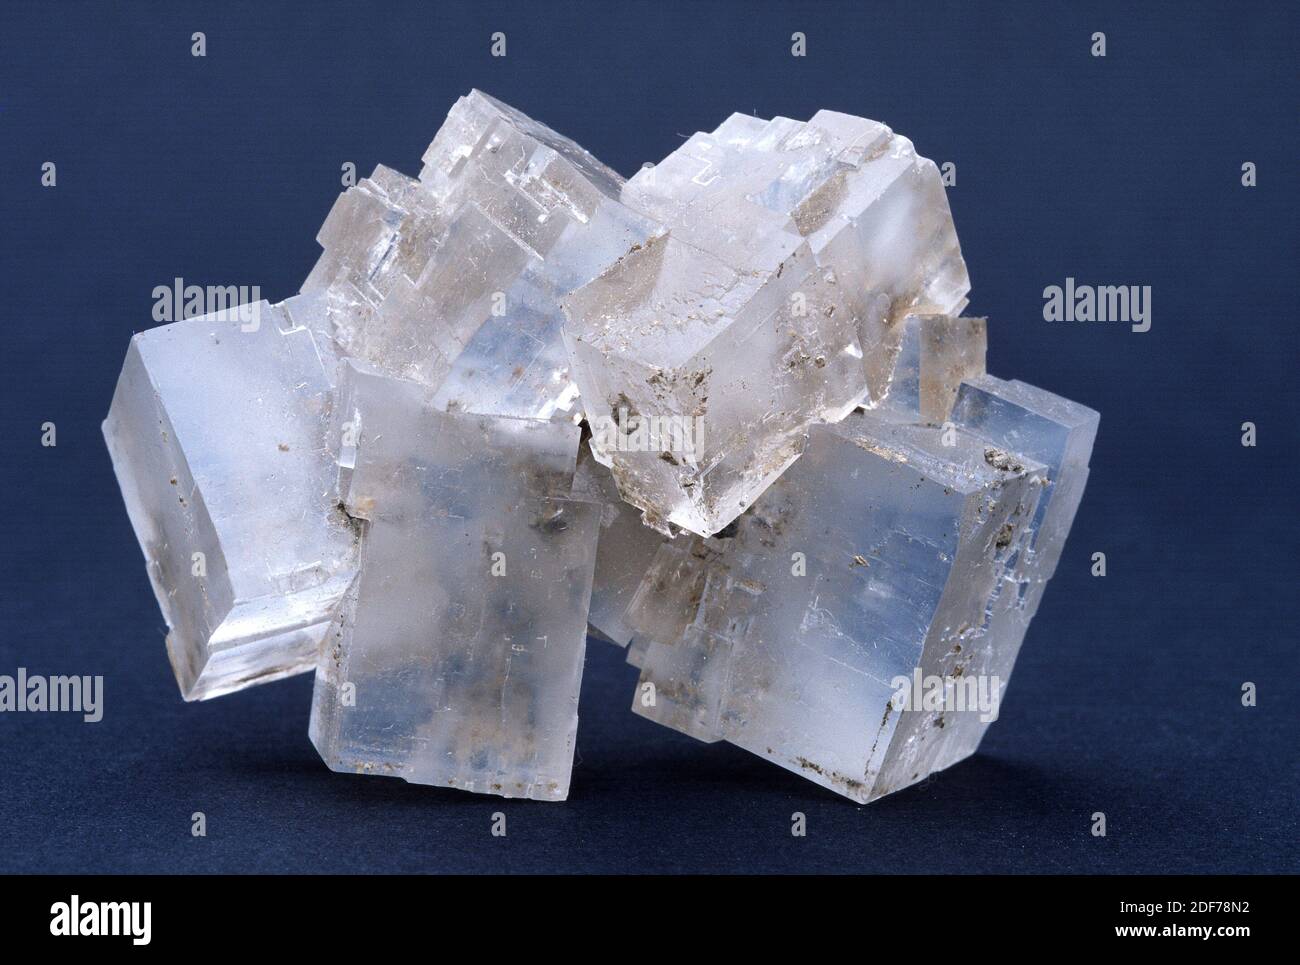 Halite or rock salt is a sodium chloride mineral. Crystallized sample. Stock Photo